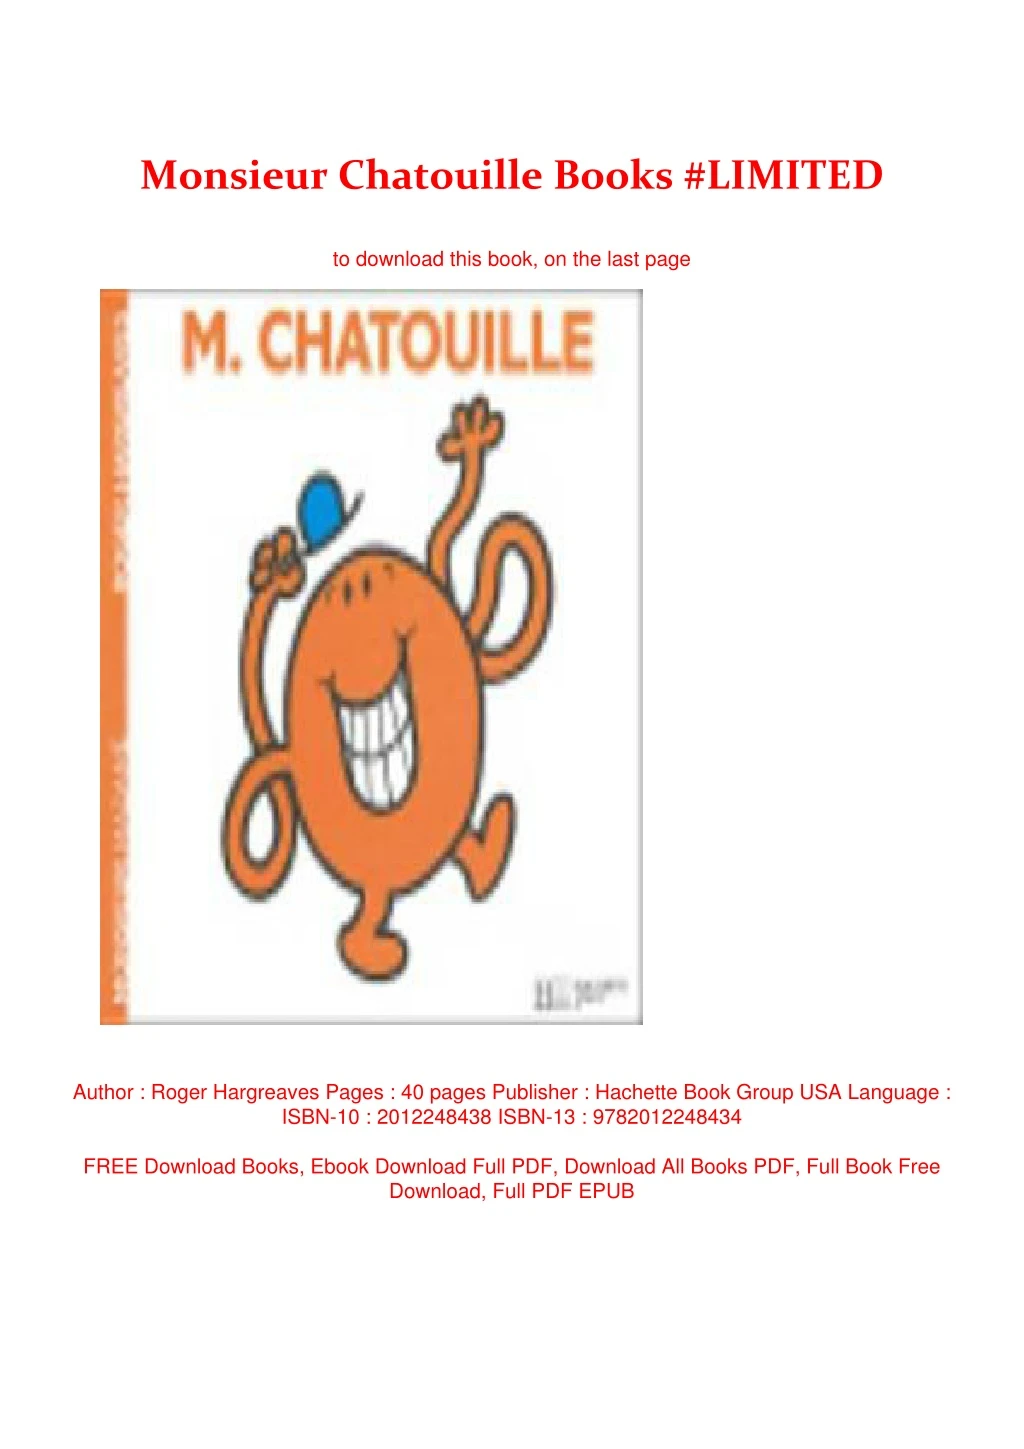 monsieur chatouille books limited